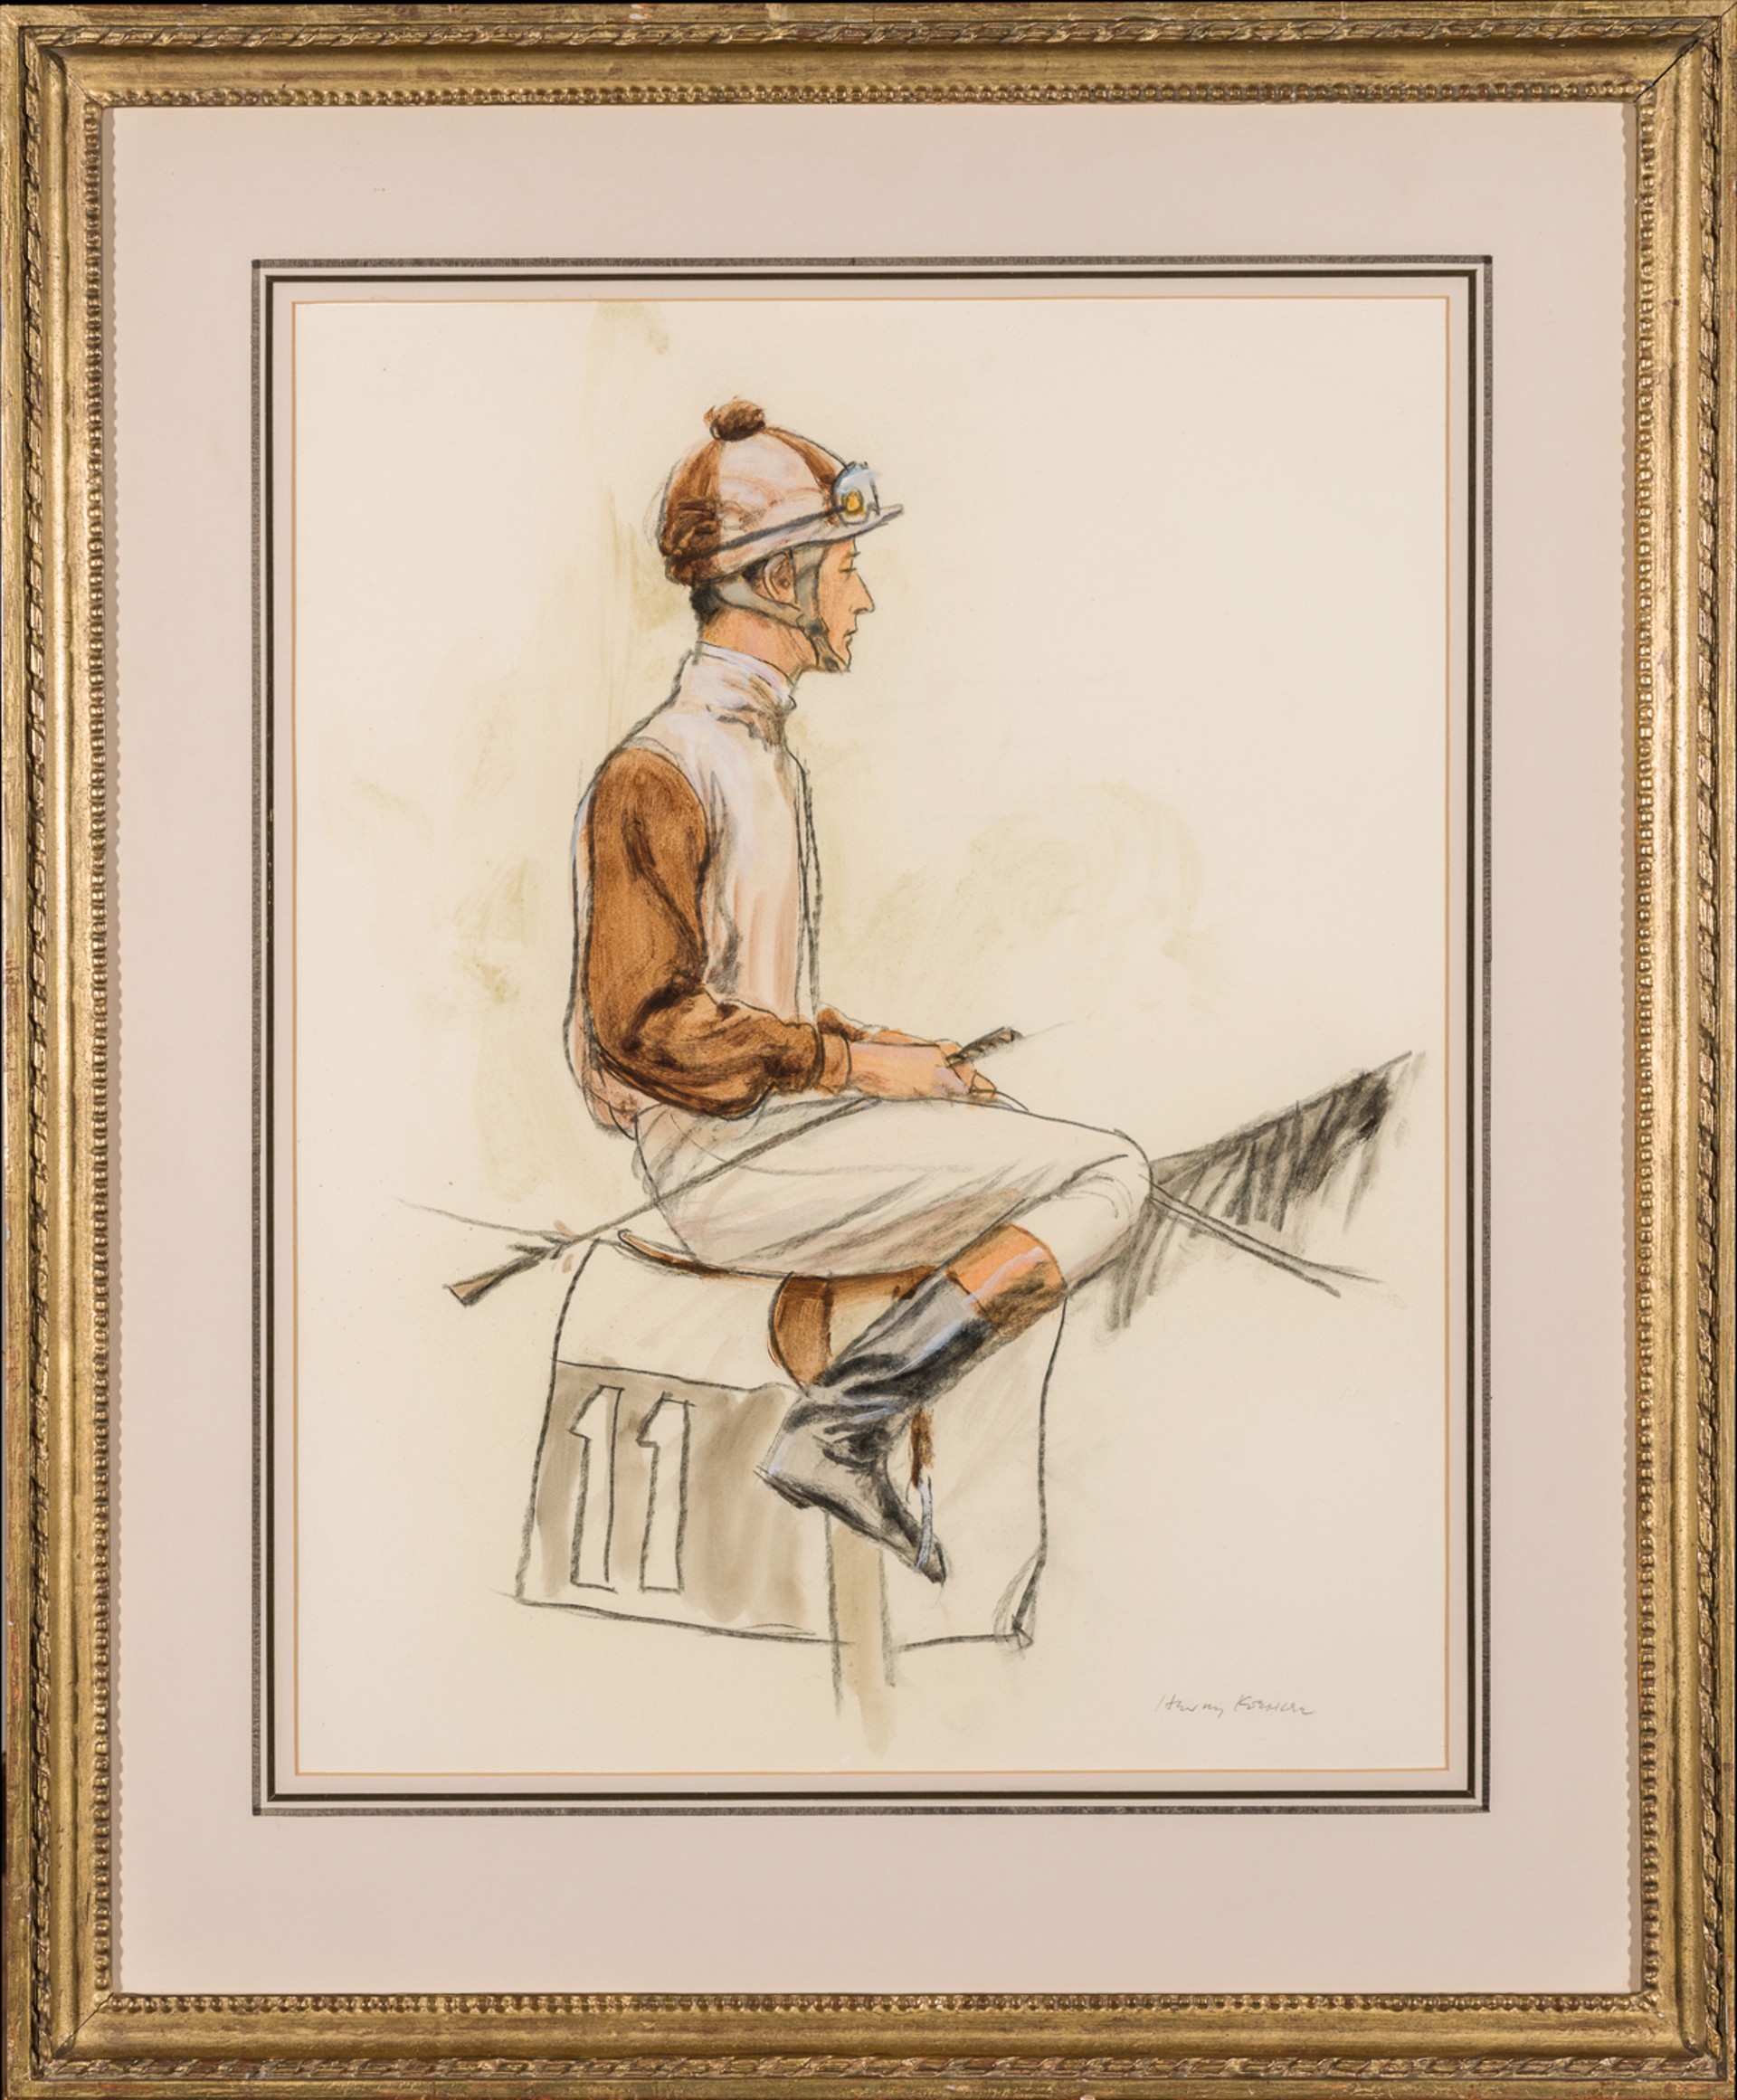 BRAULIO BAEZA AT THE ARC, COLOURS OF J.W. GALBREATH (DARBY DAN) by Henry Koehler